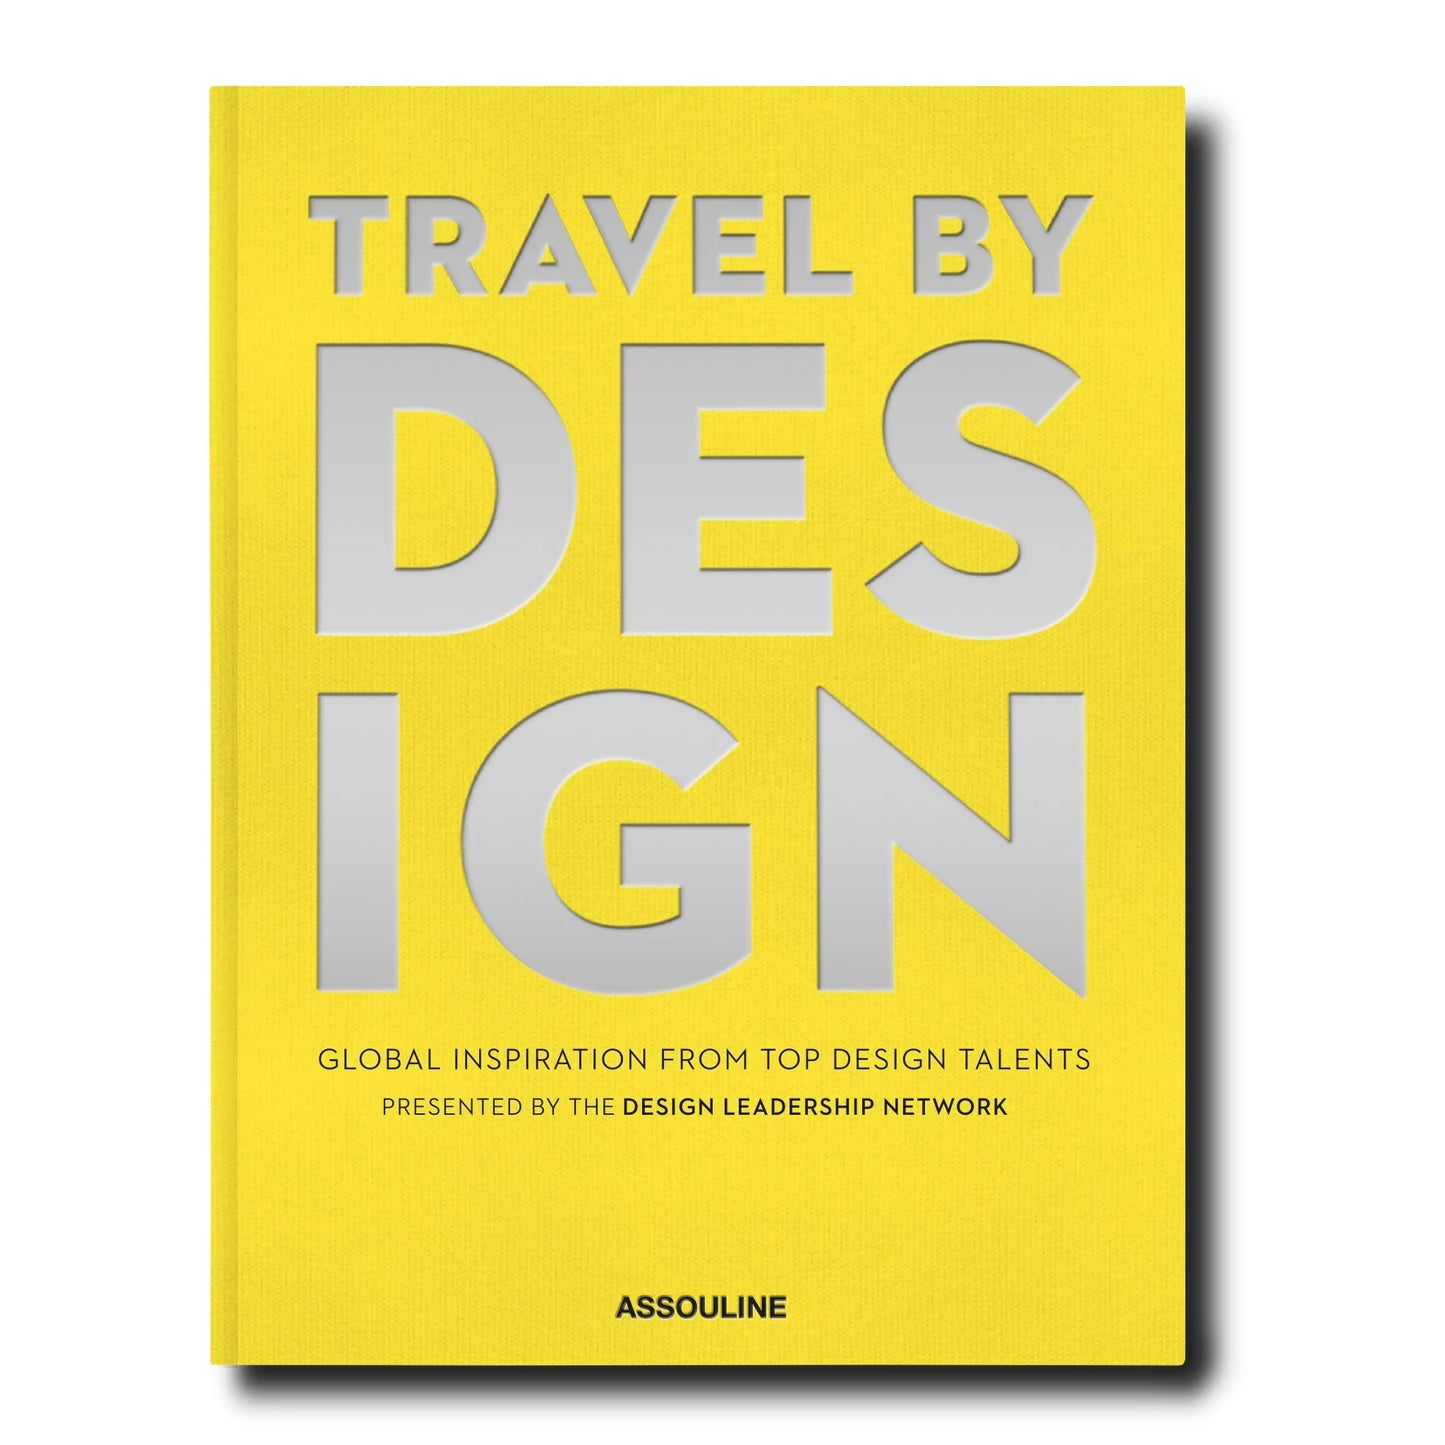 TRAVEL BY DESIGN BOOK - $95